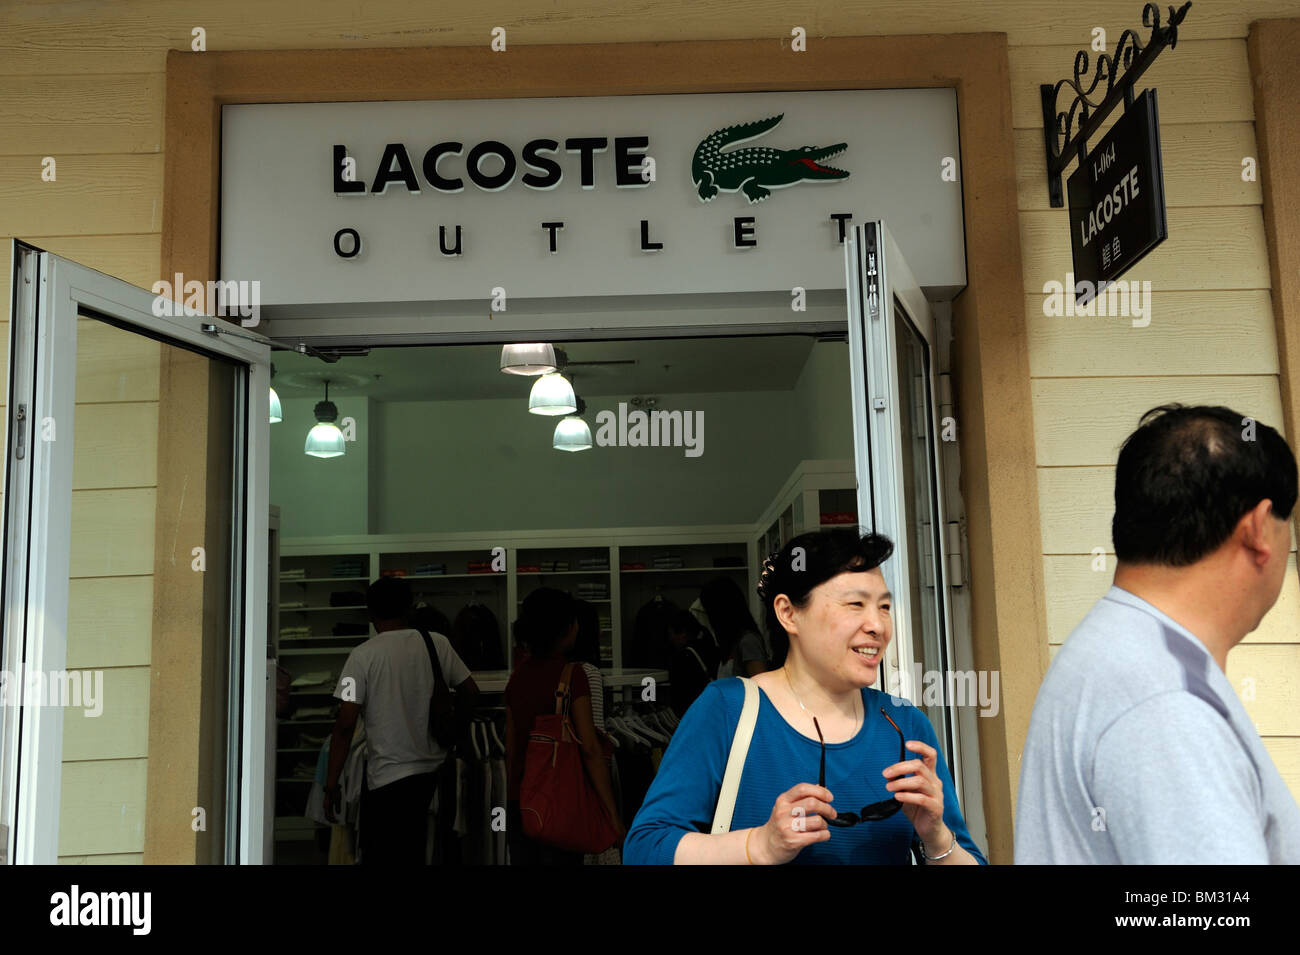 Lacoste Outlet Shop High Resolution Stock Photography and Images - Alamy